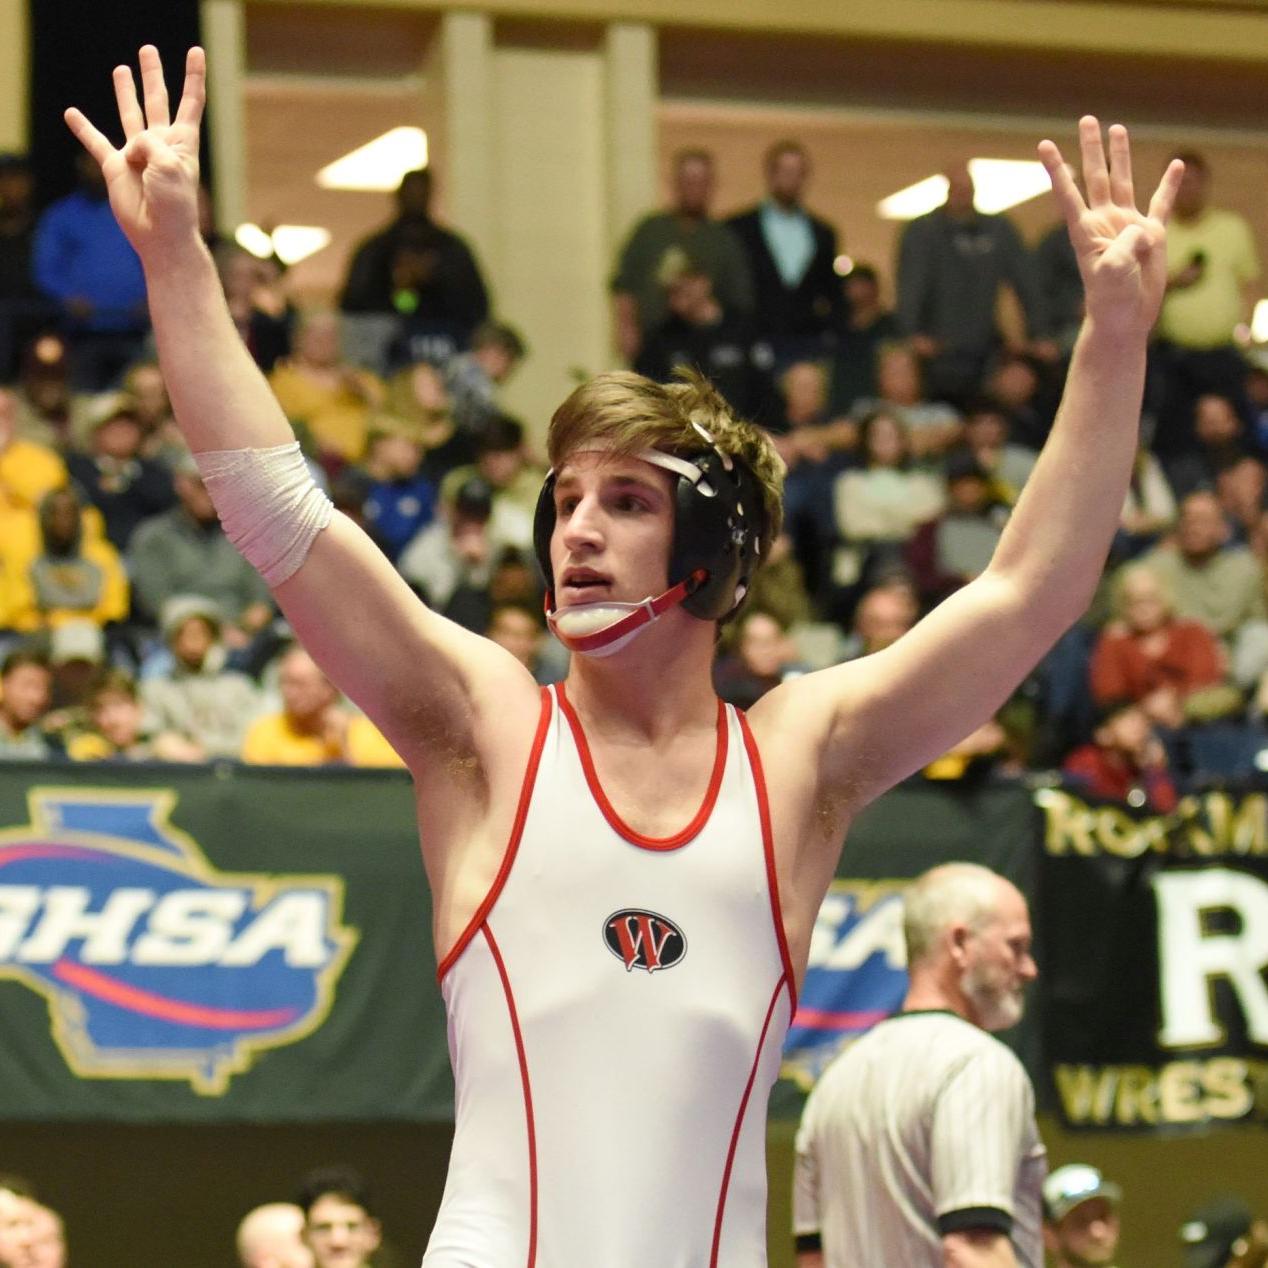 Four-peat: Nick Masters makes state history for Woodward wrestling, Neighbor Newspapers